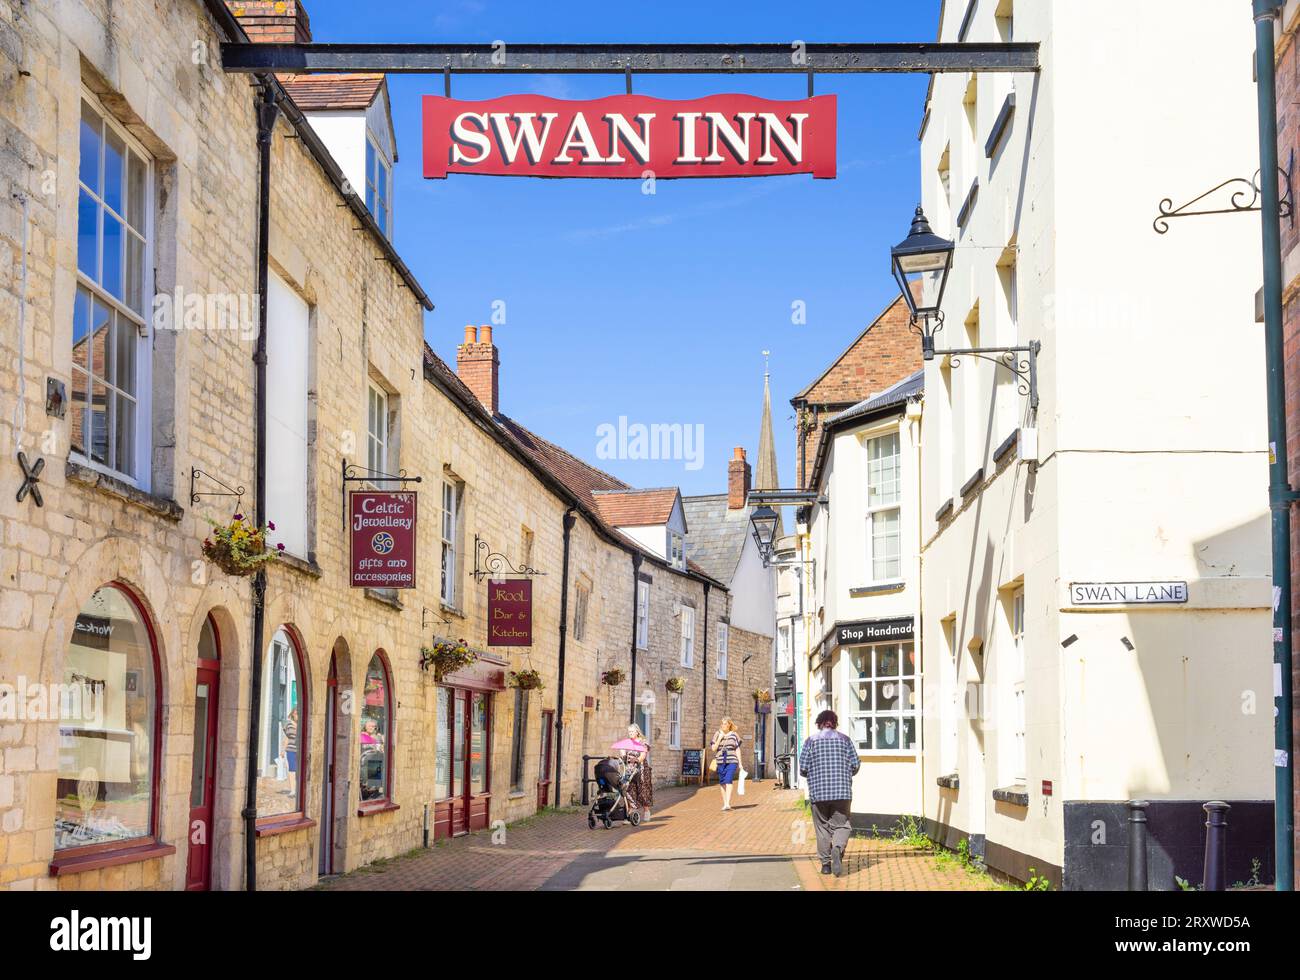 Stroud Town centre 16th Century Swan Inn Union Street Stroud, Gloucestershire Angleterre Royaume-Uni GB Europe Banque D'Images